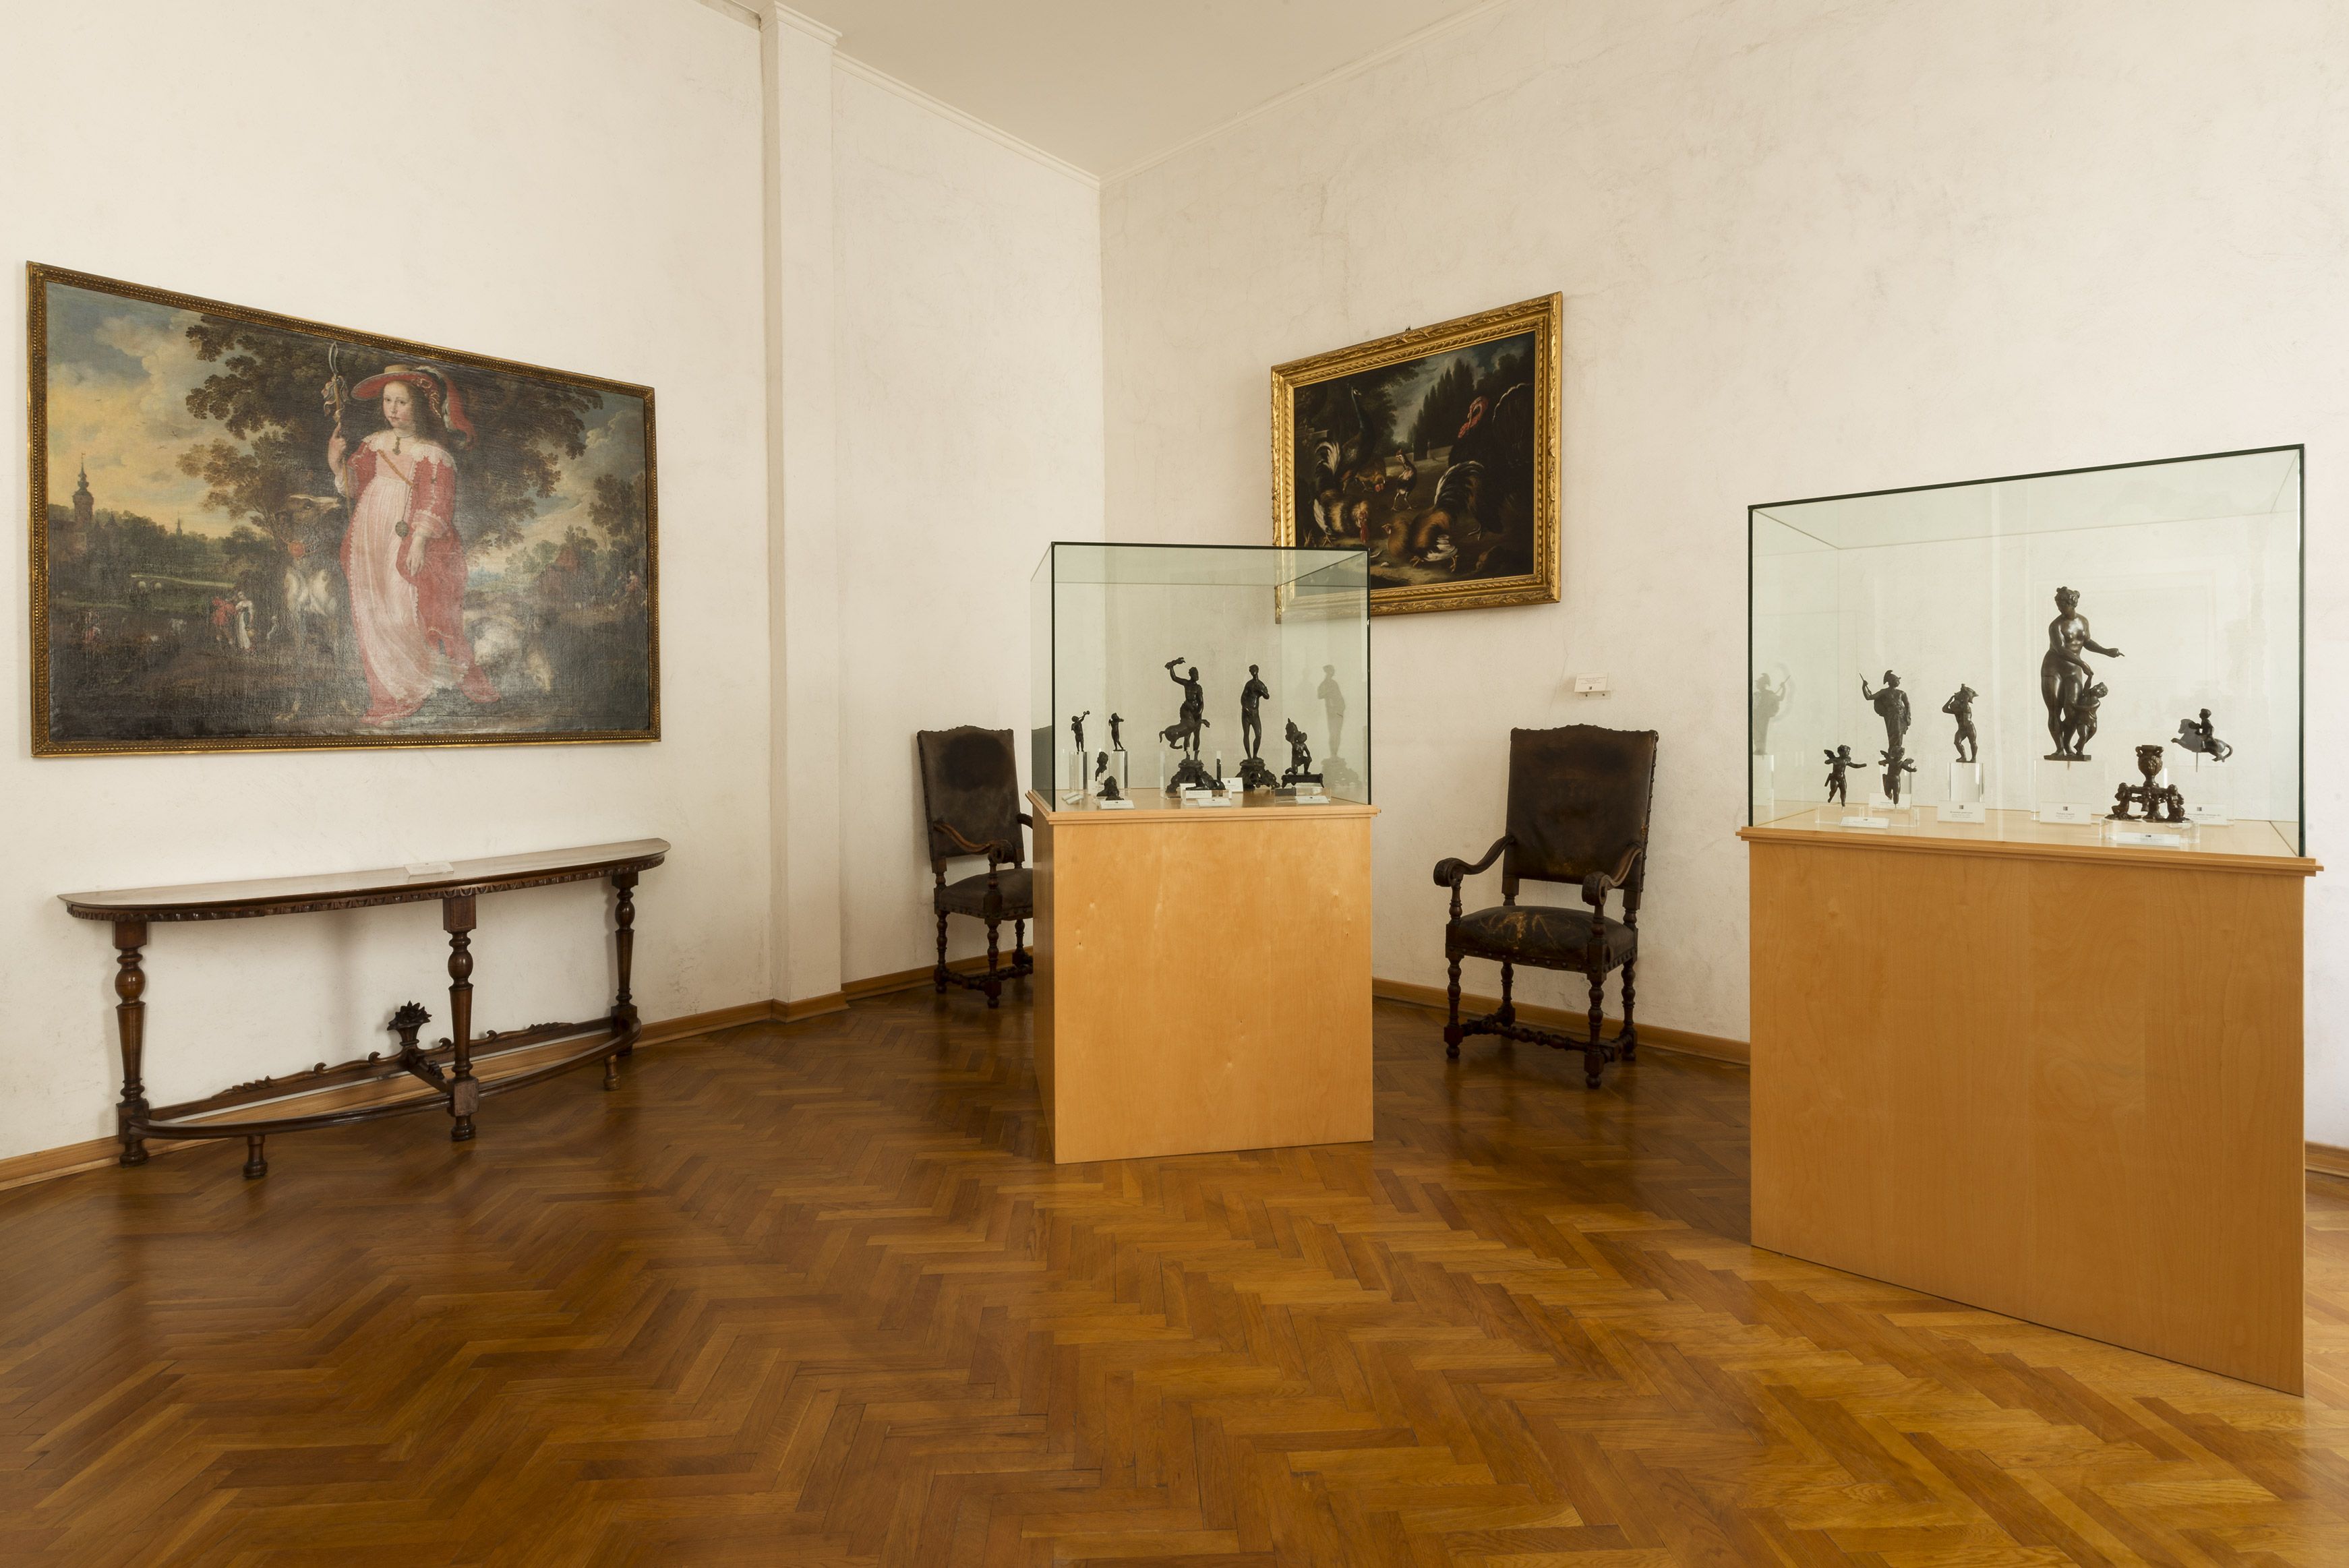 Rooms of the Renaissance bronzes